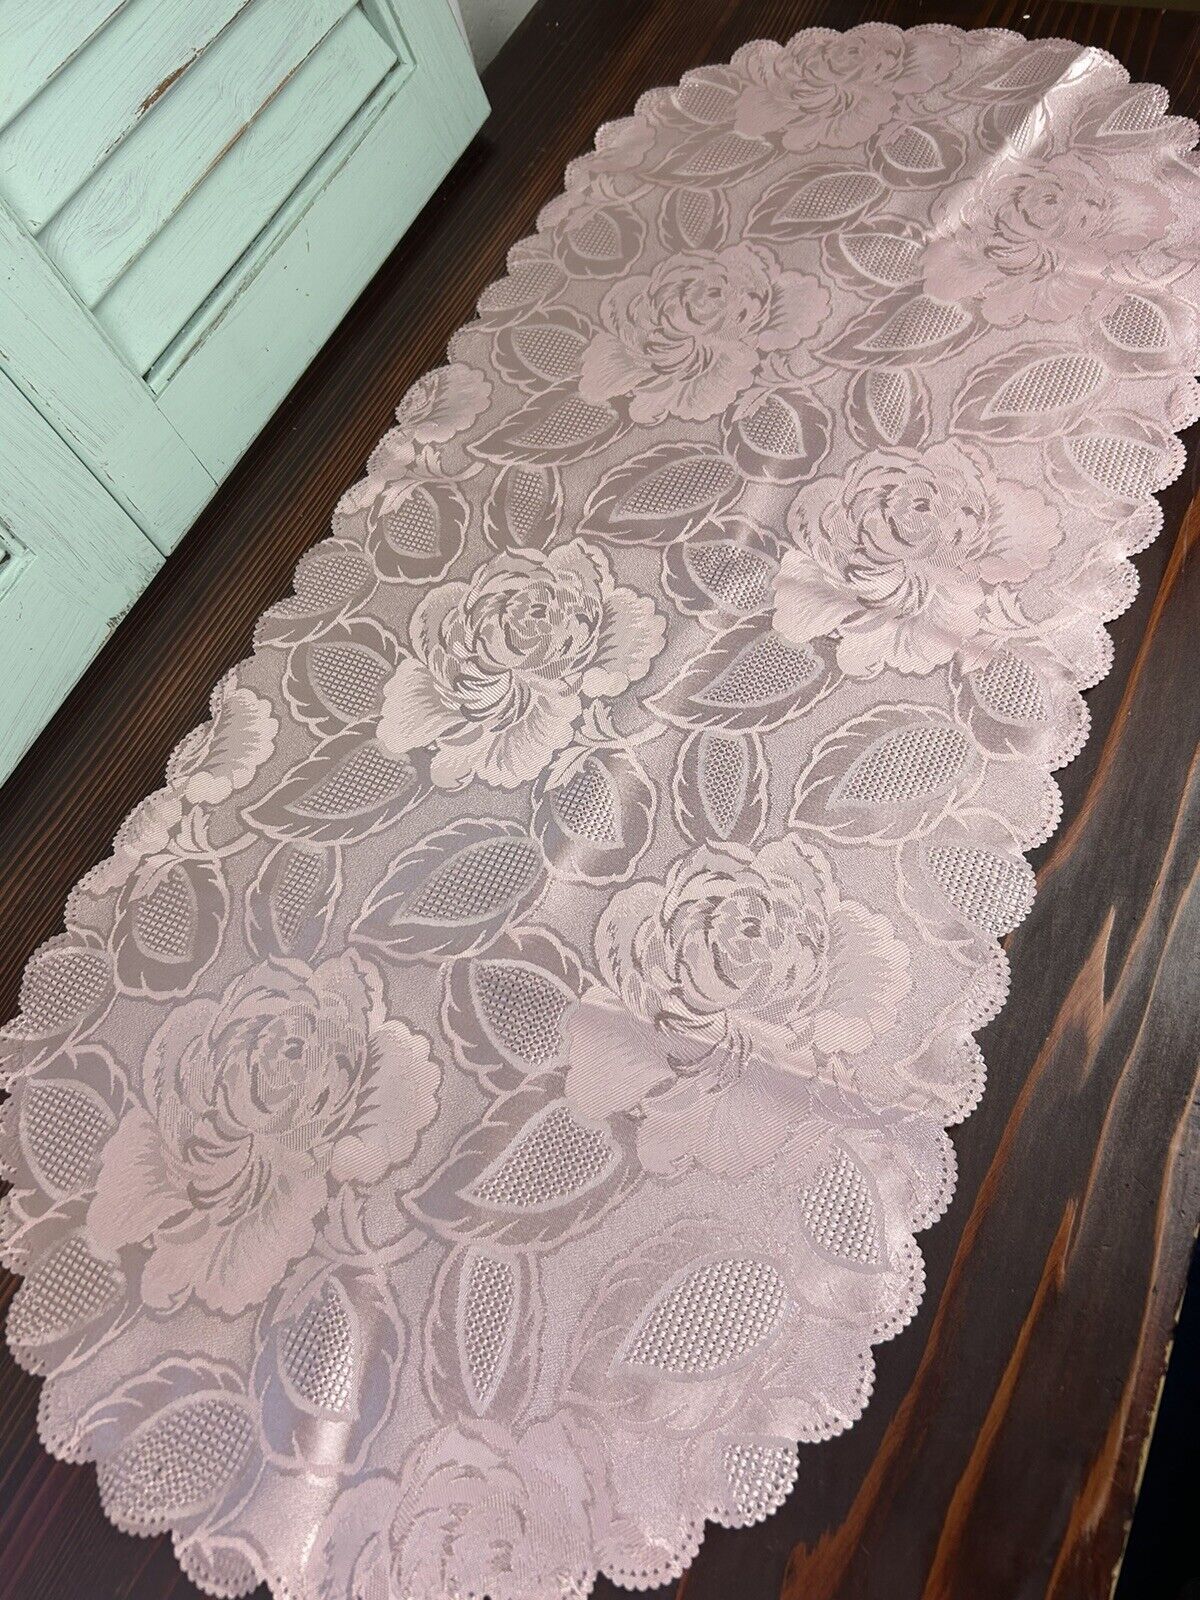 Vintage Pink Satin Table Runner Dresser Scarf Scalloped Roses Granny Chic 15x35